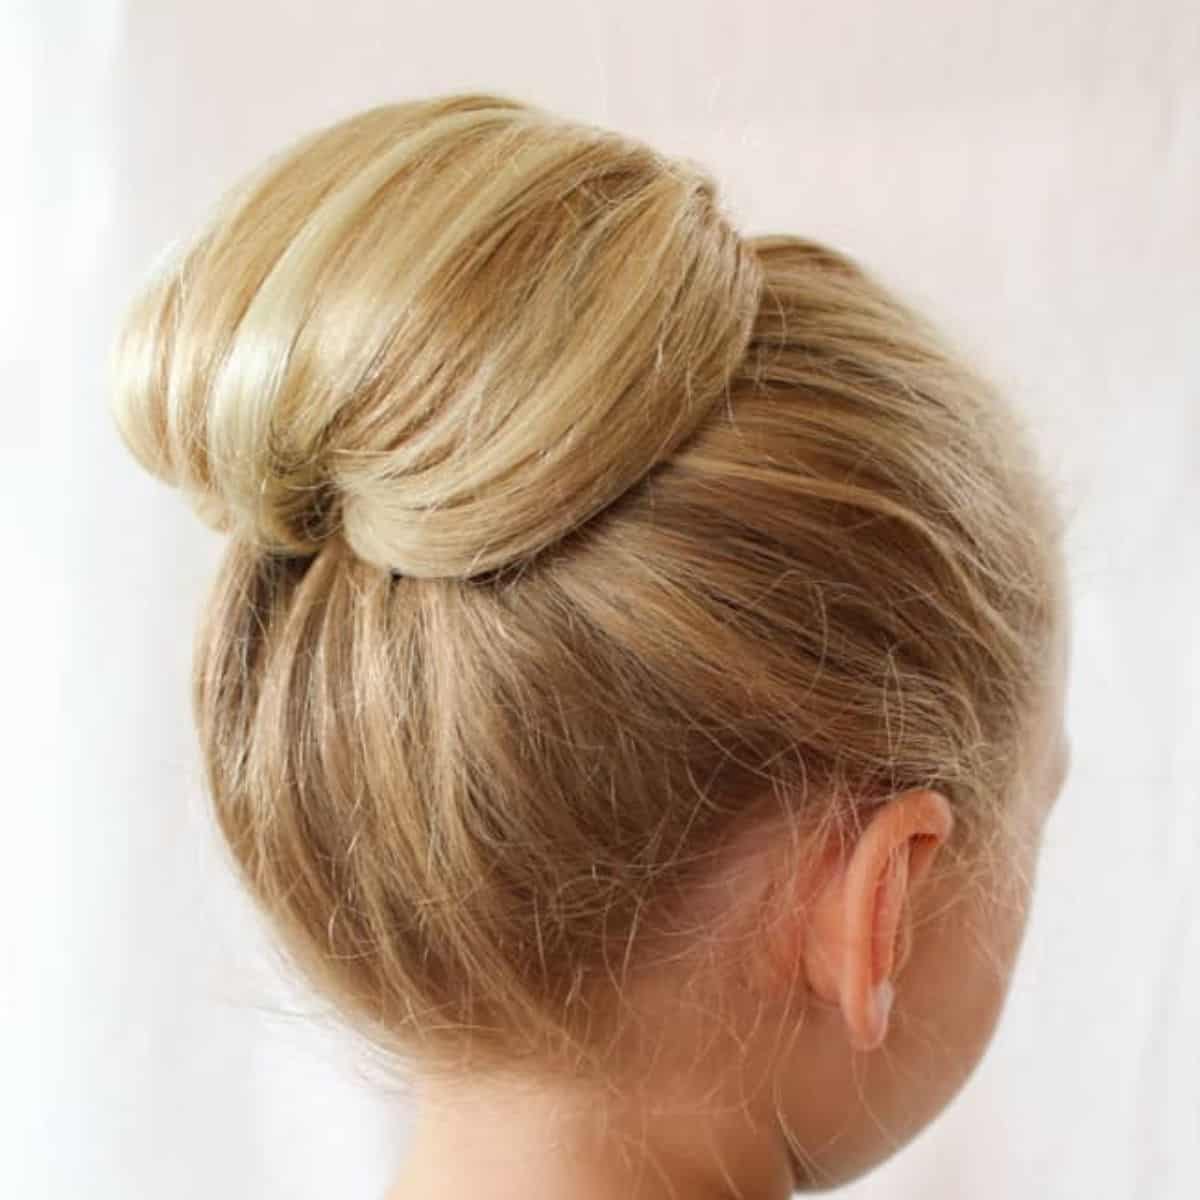 Pin by Pinner on hair. | Weave ponytail hairstyles, Sleek ponytail  hairstyles, Hair ponytail styles